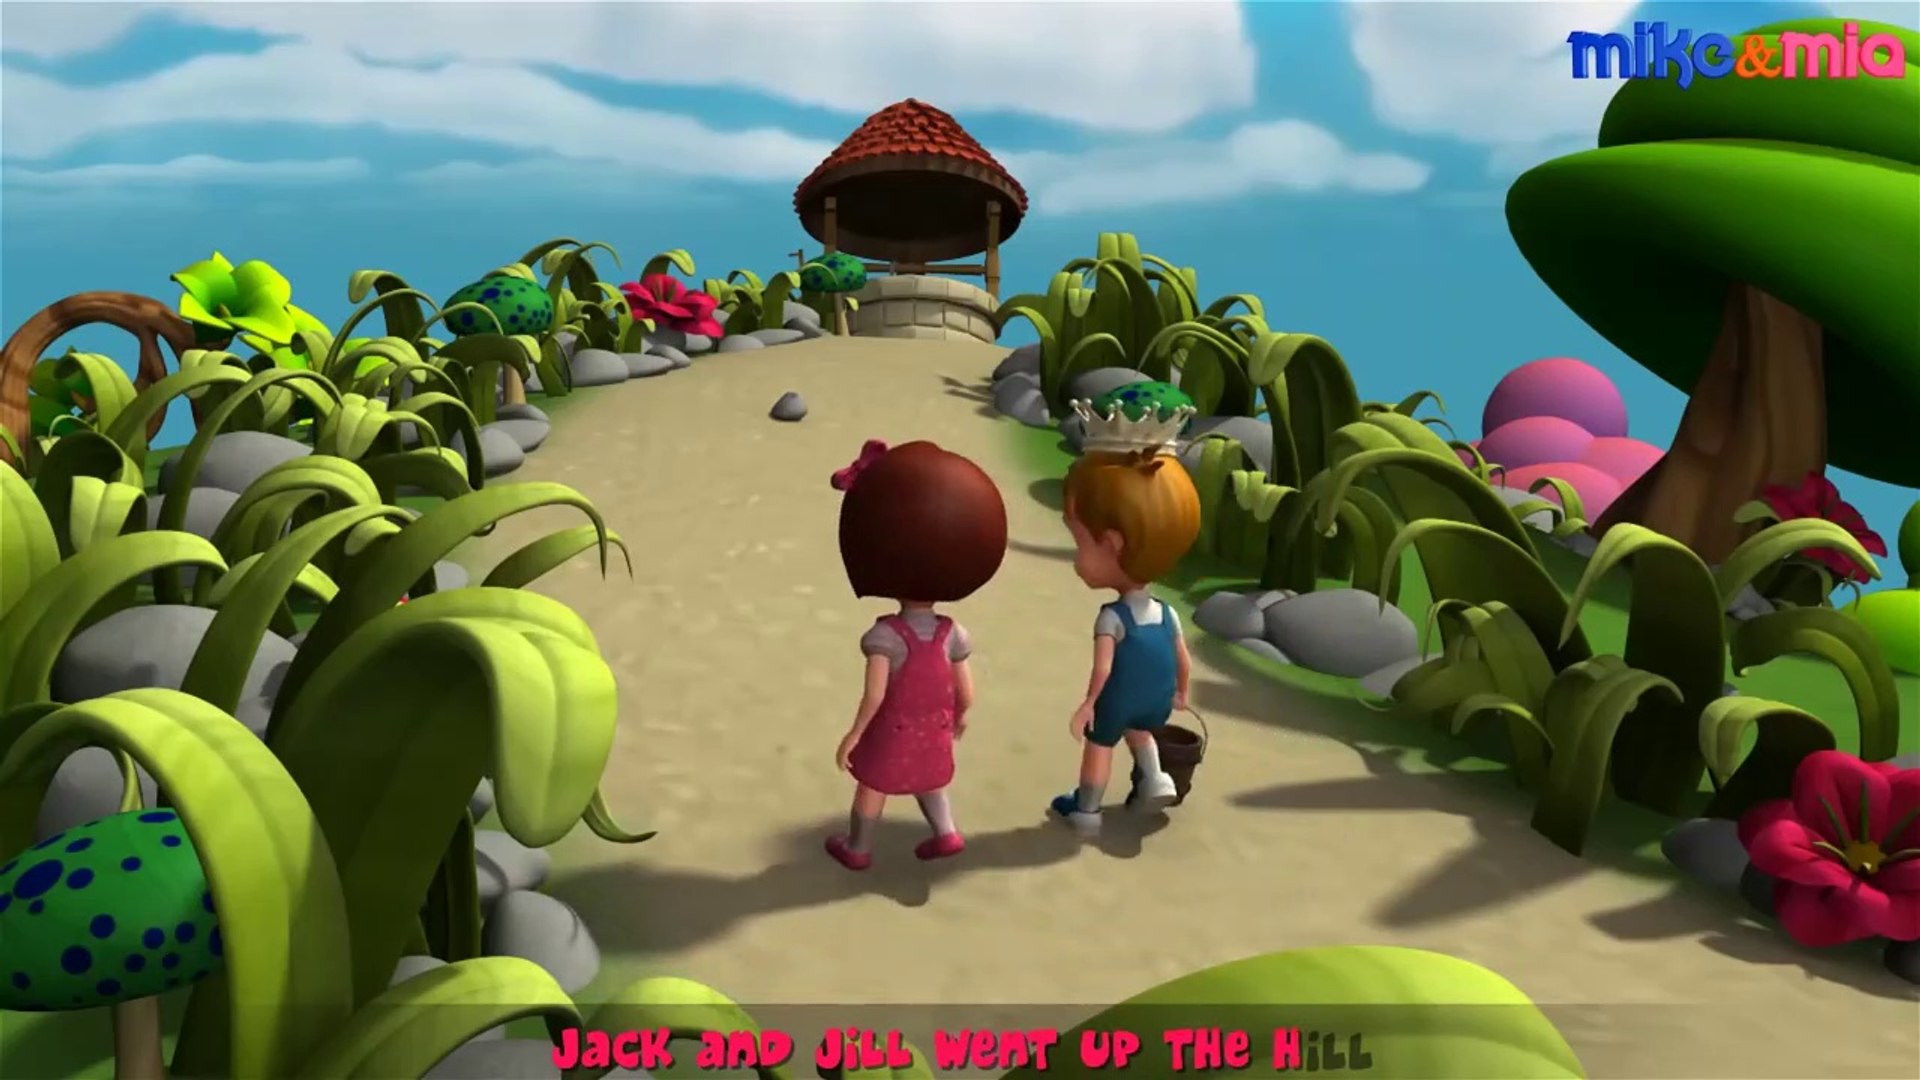 Jack And Jill Went Up The Hill Nursery Rhymes And English Nursery Rhymes Songs For Children With Lyrics By Hd Nursery Rhymes Video Dailymotion